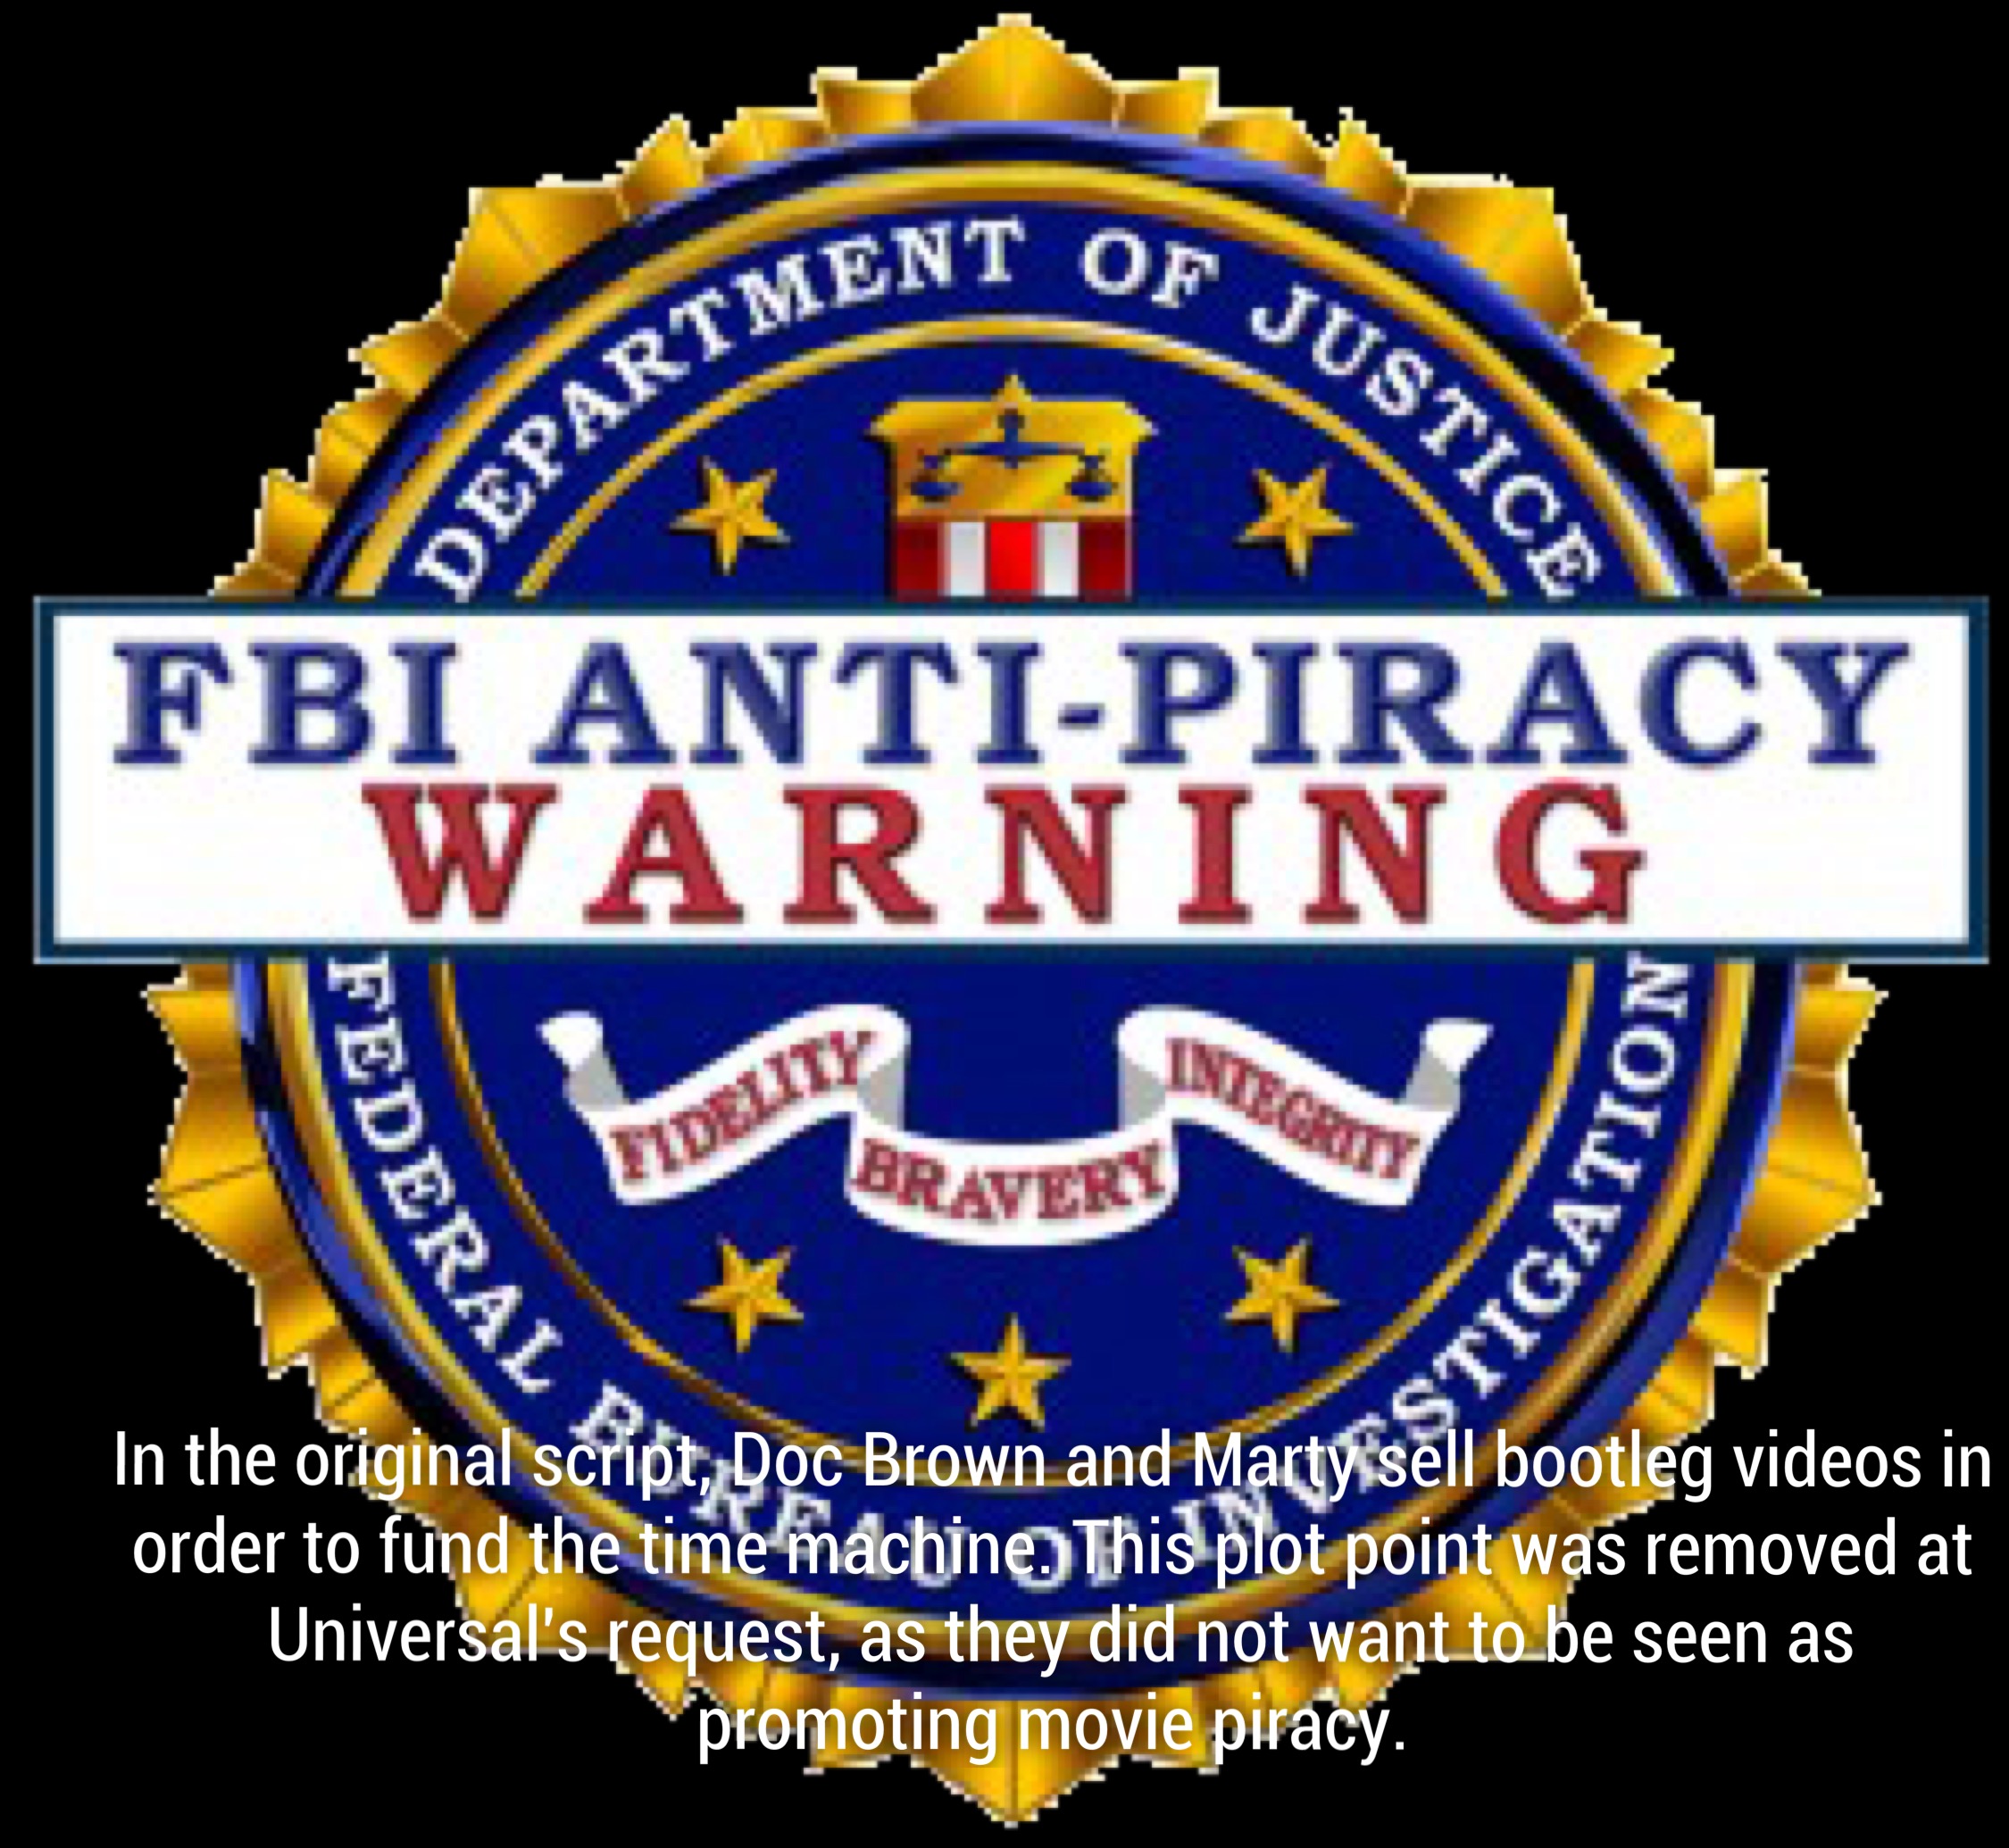 badge - Vent Of Justic Departa Fbi AntiPiracy Warning Sieci Feder Tidelit Bravers Ederal Cigation In the original script, Doc Brown and Martyrsell bootleg videos in order to fund the time machine This plot point was removed at Universal's request, as they